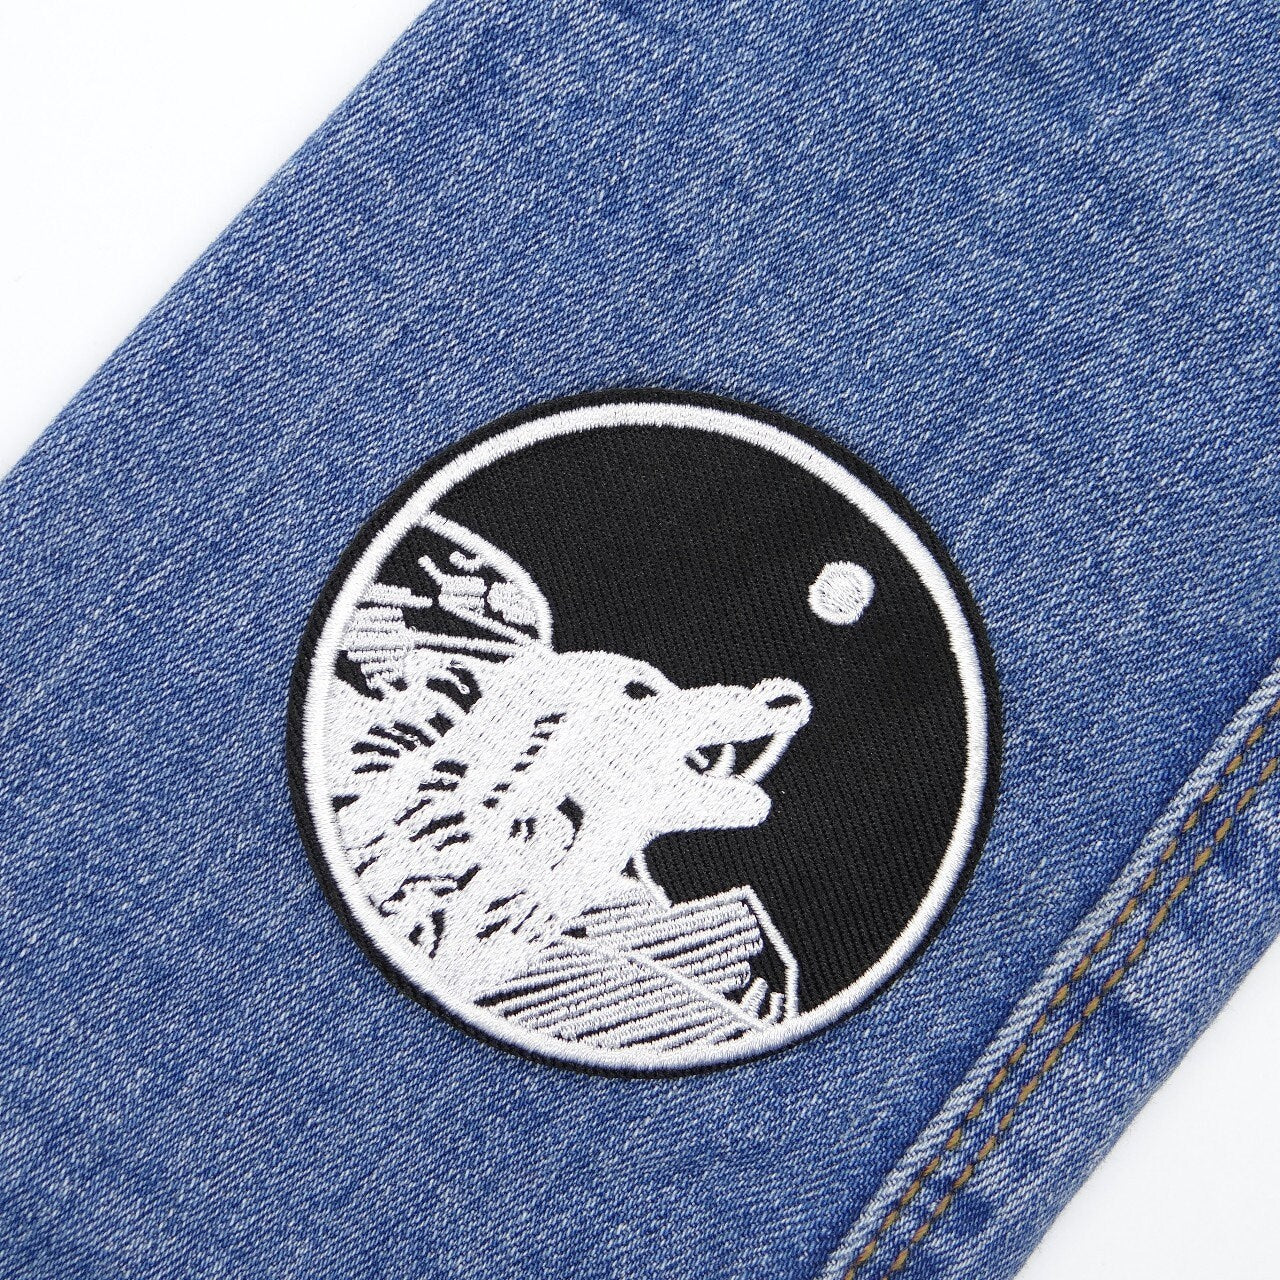 Iron on Patches / Sew on embroidered patches - White Wolf Embroidery Patchwork - Scary Animal Pets Dog Moon Applique DIY Badge for Clothing